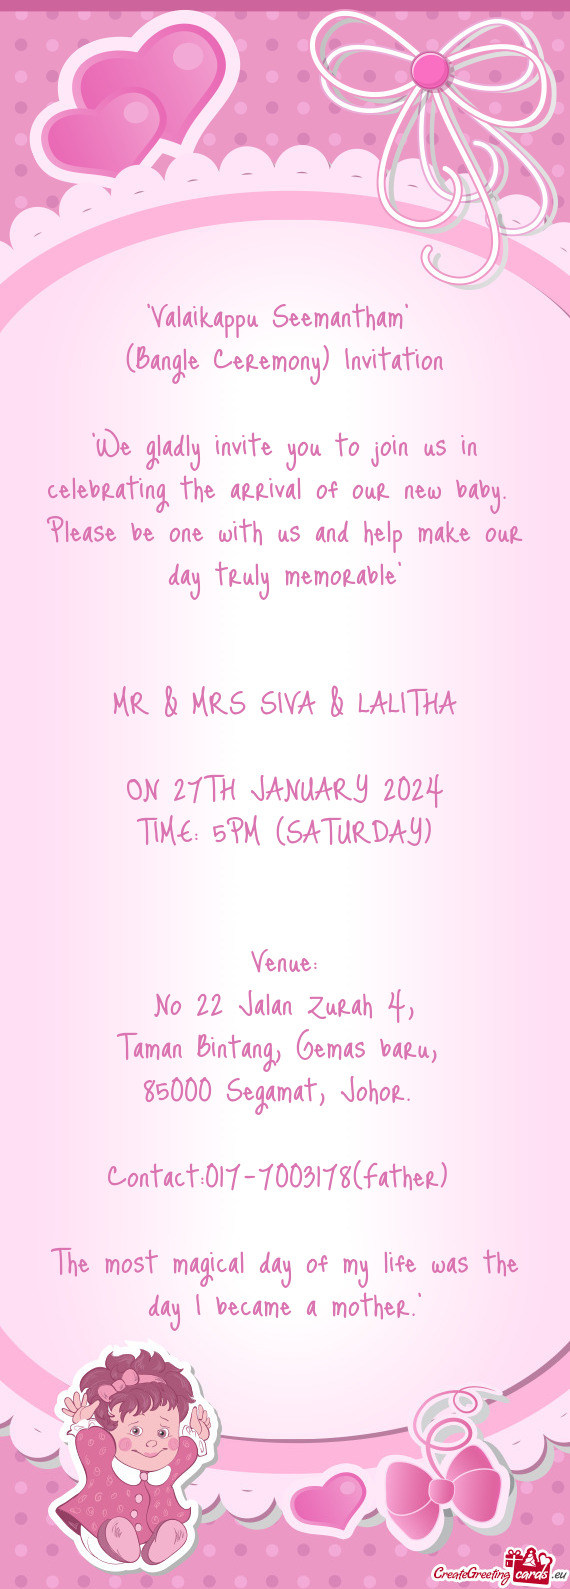 Please be one with us and help make our day truly memorable"